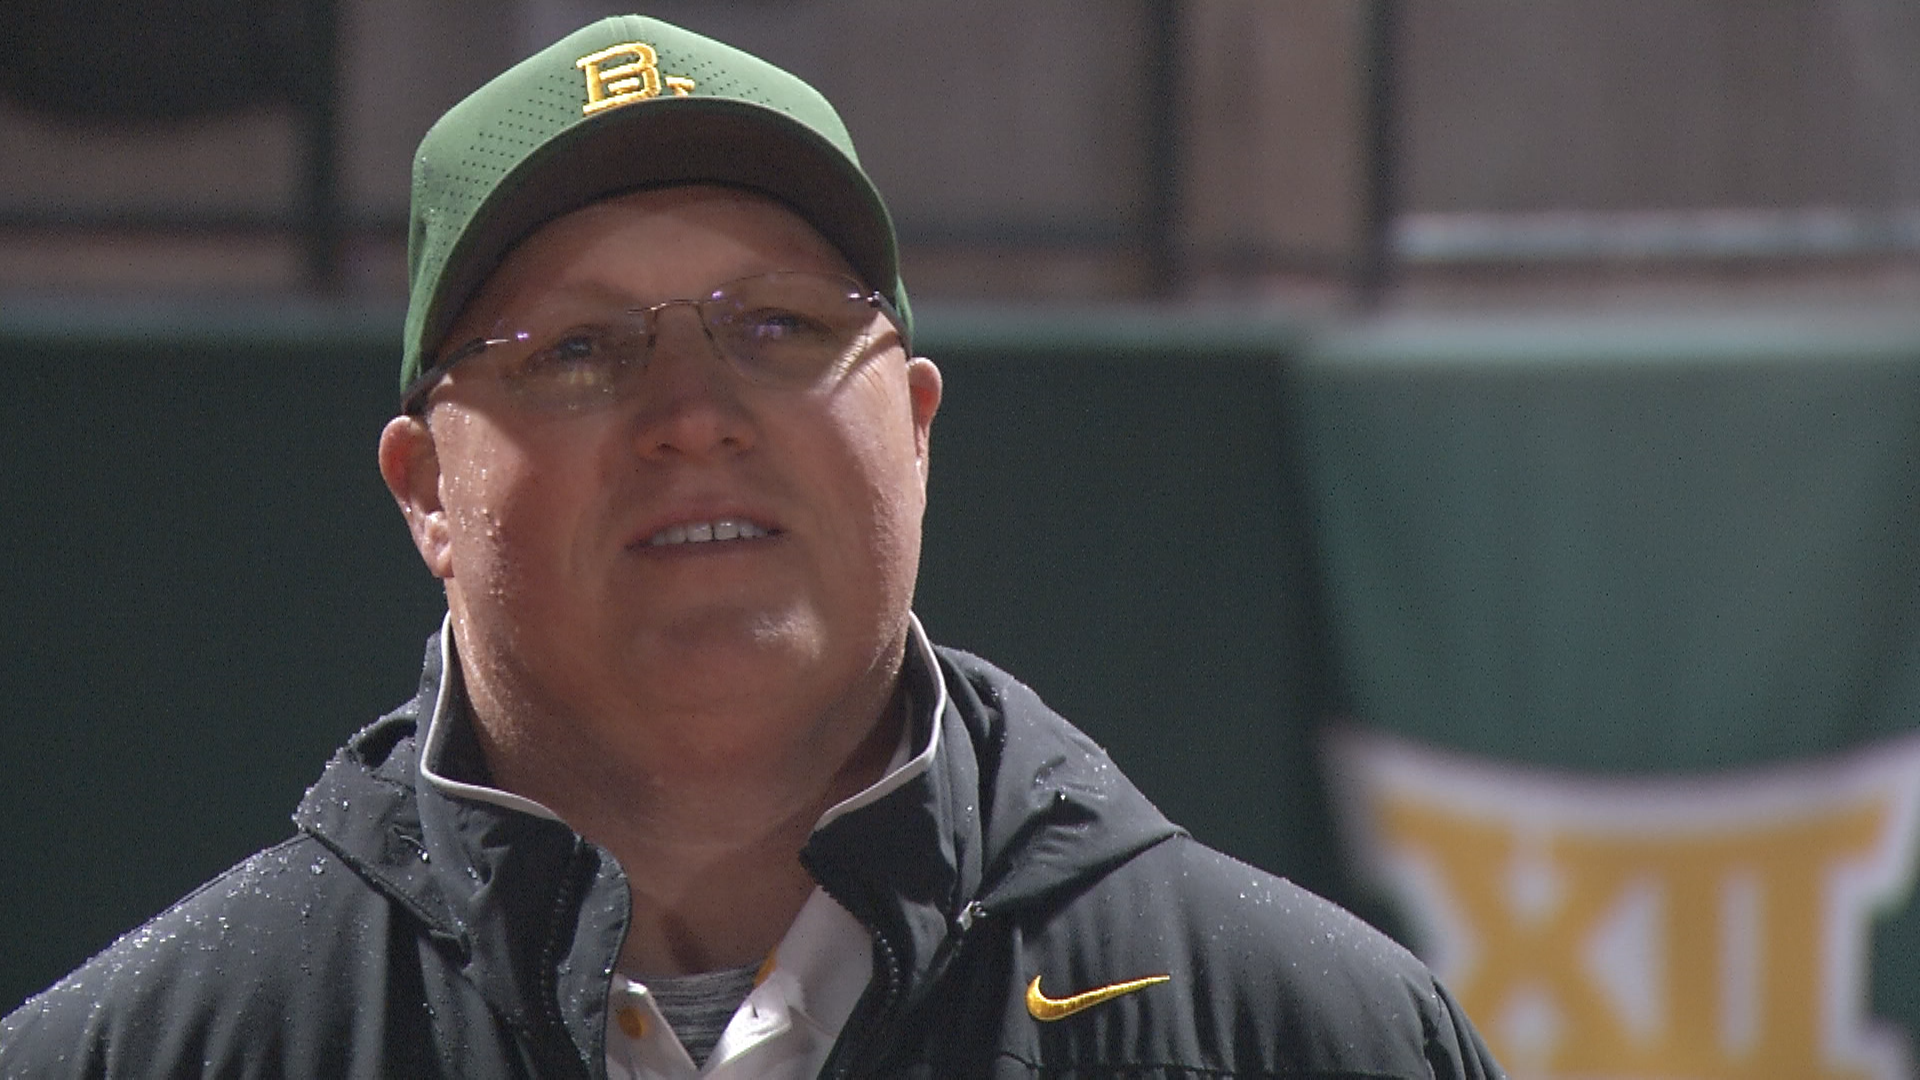 In his 20th season guiding the Lady Bears, Moore accounts for all four Baylor berths to the Women's College World Series.